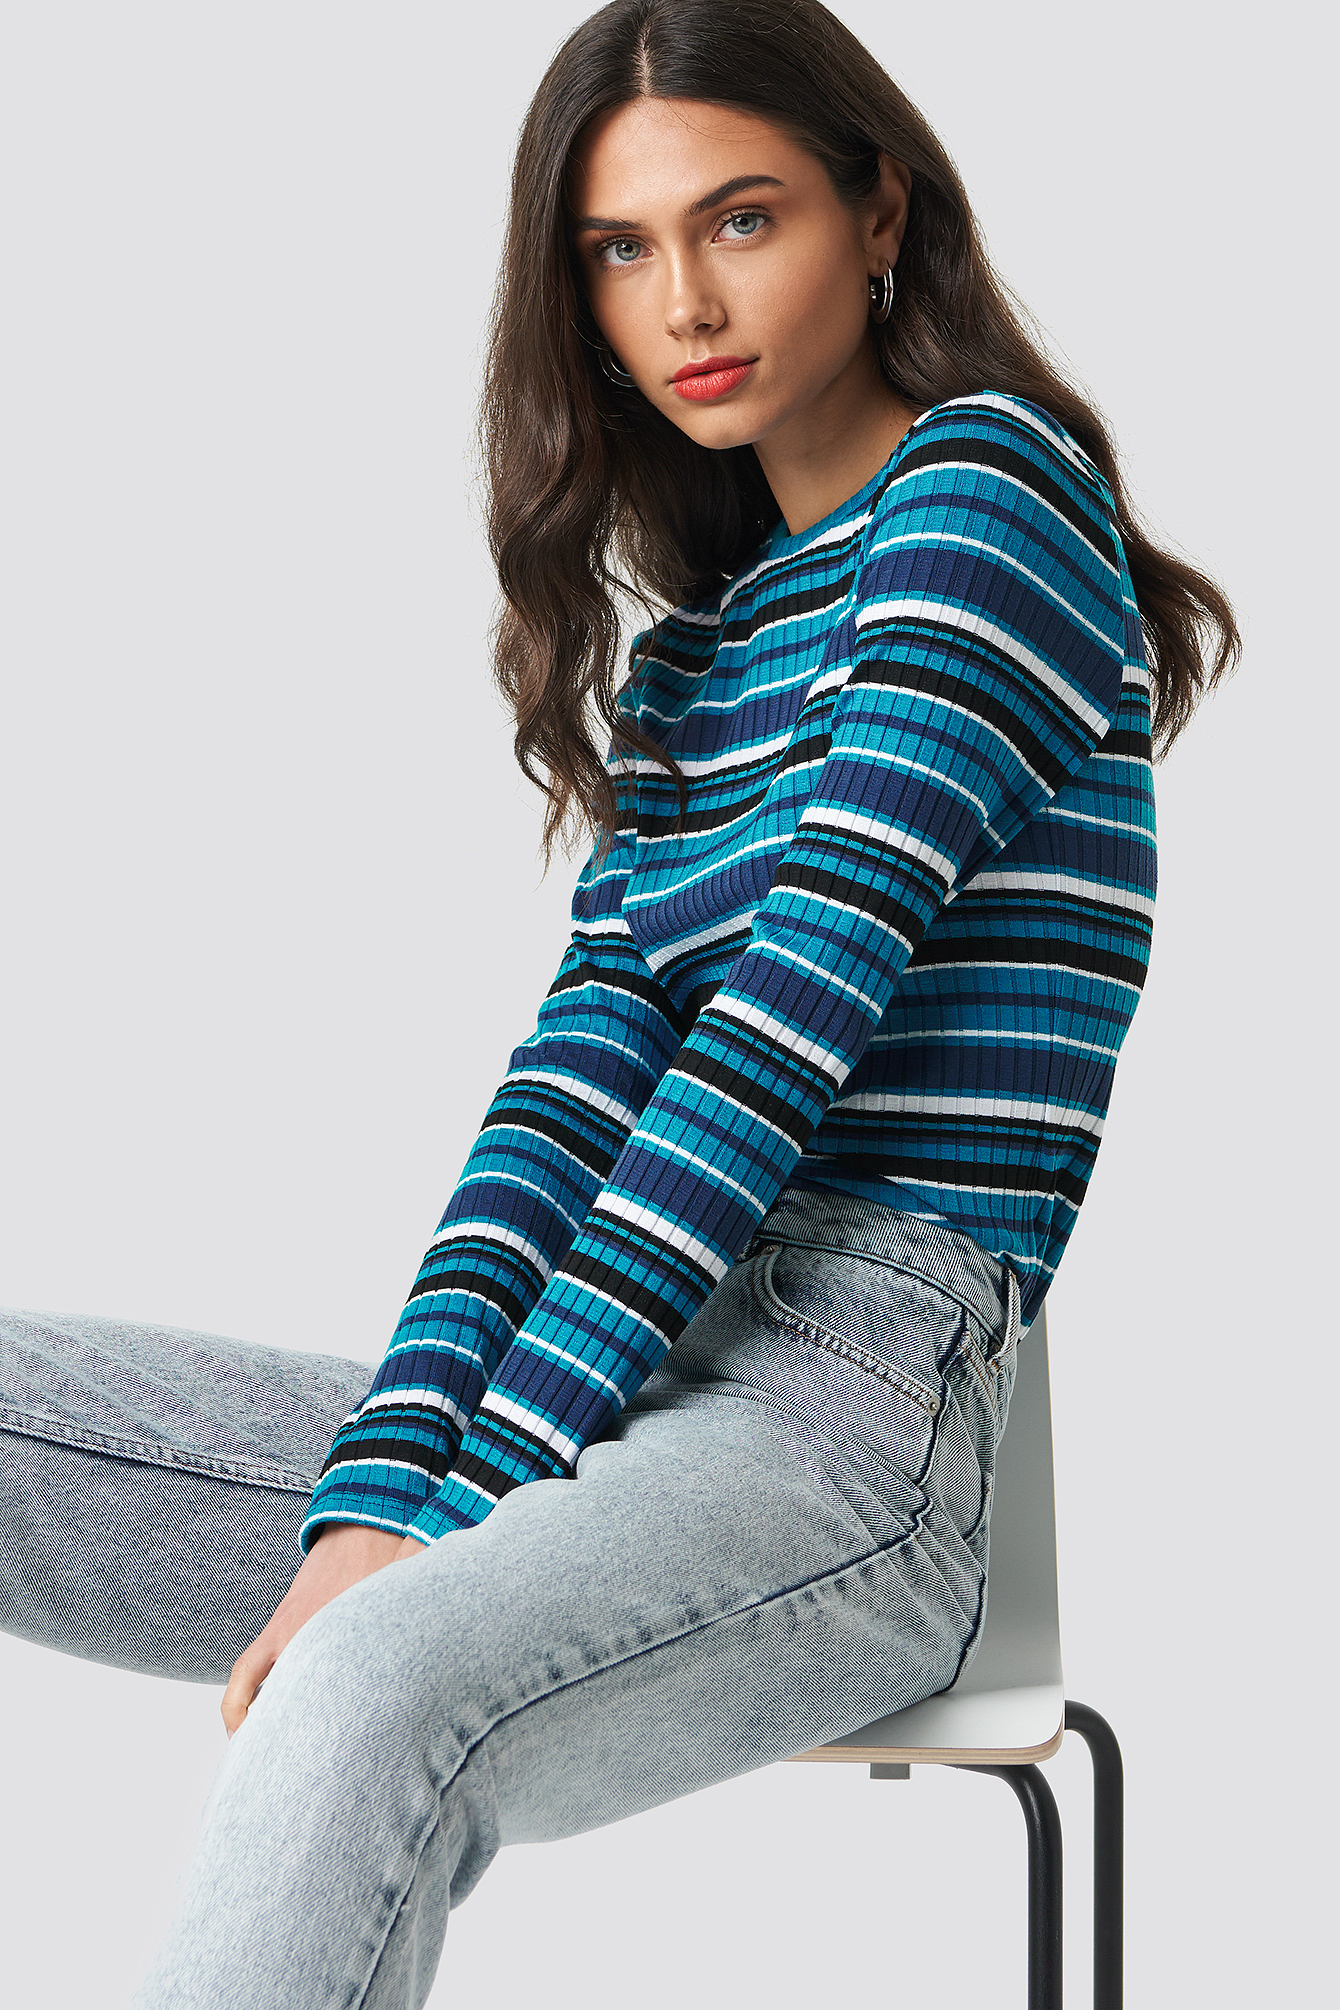 Turquoise NA-KD Round Neck Striped Top